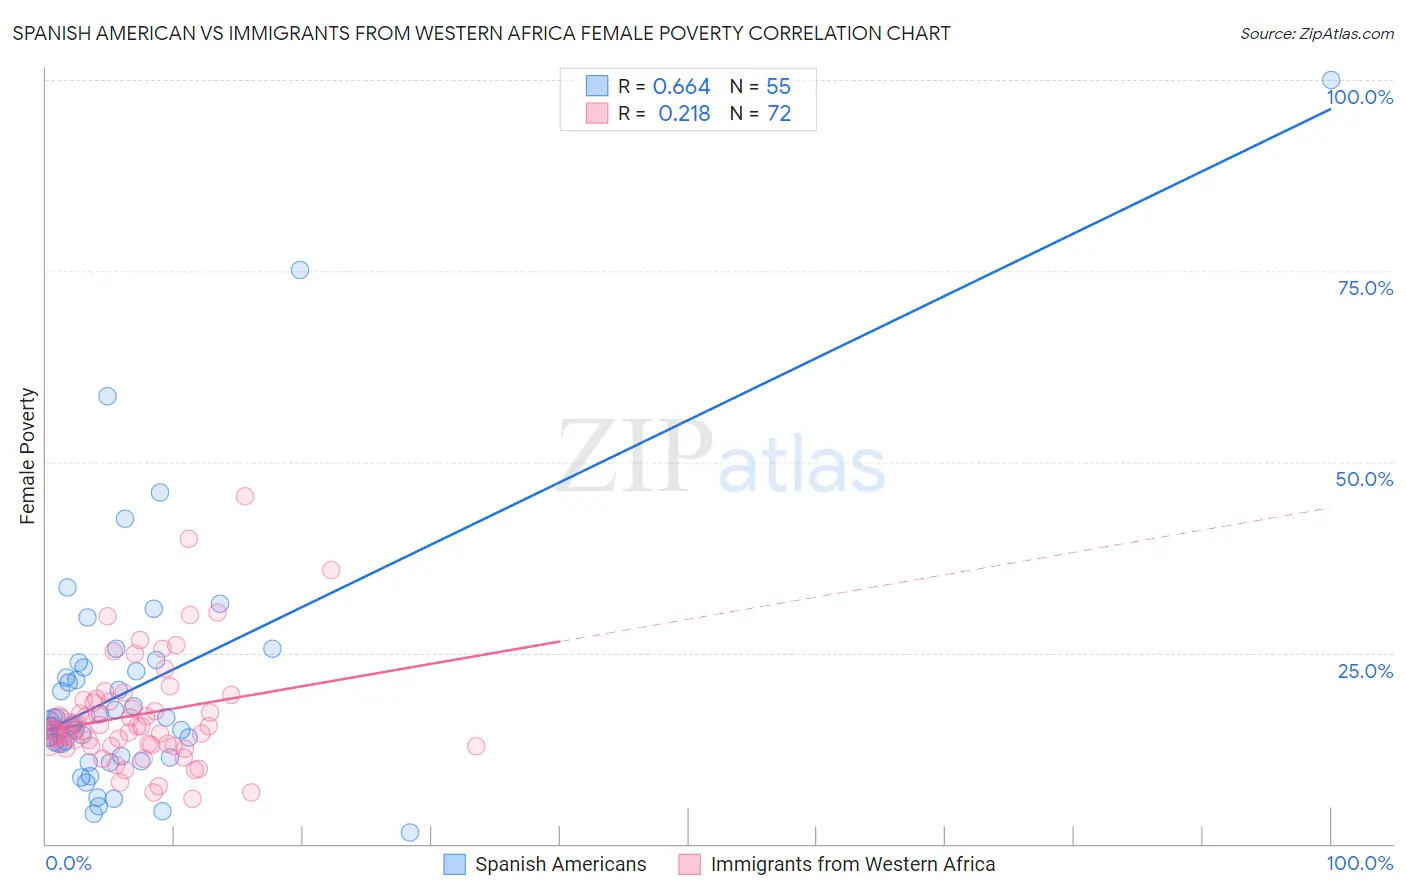 Spanish American vs Immigrants from Western Africa Female Poverty